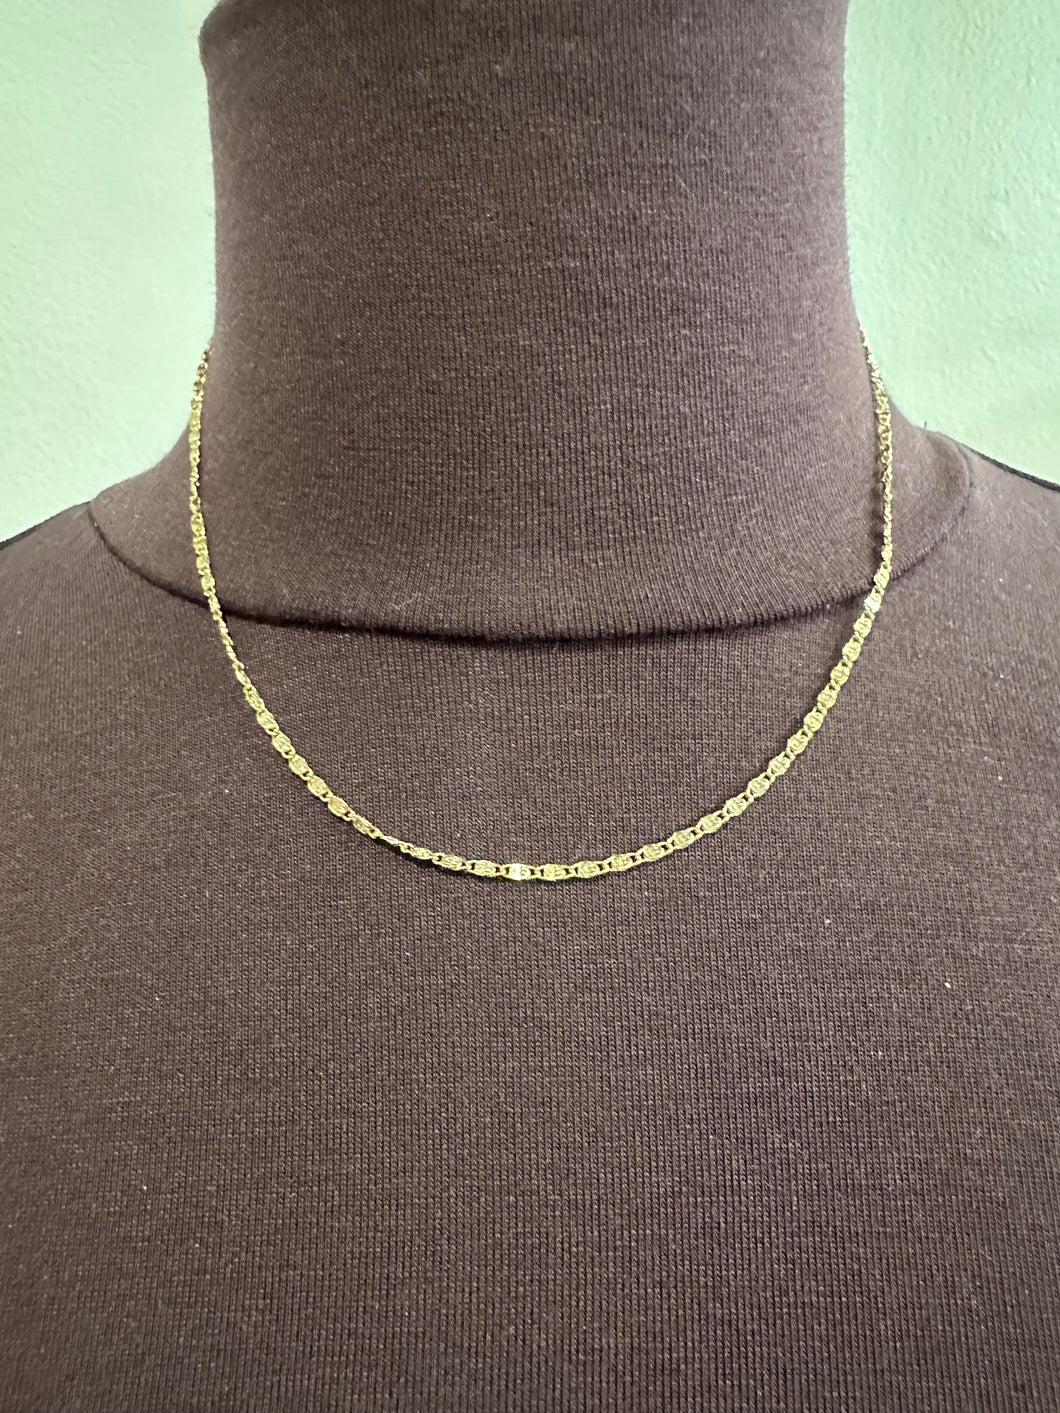 Gold Gucci Chain Necklace